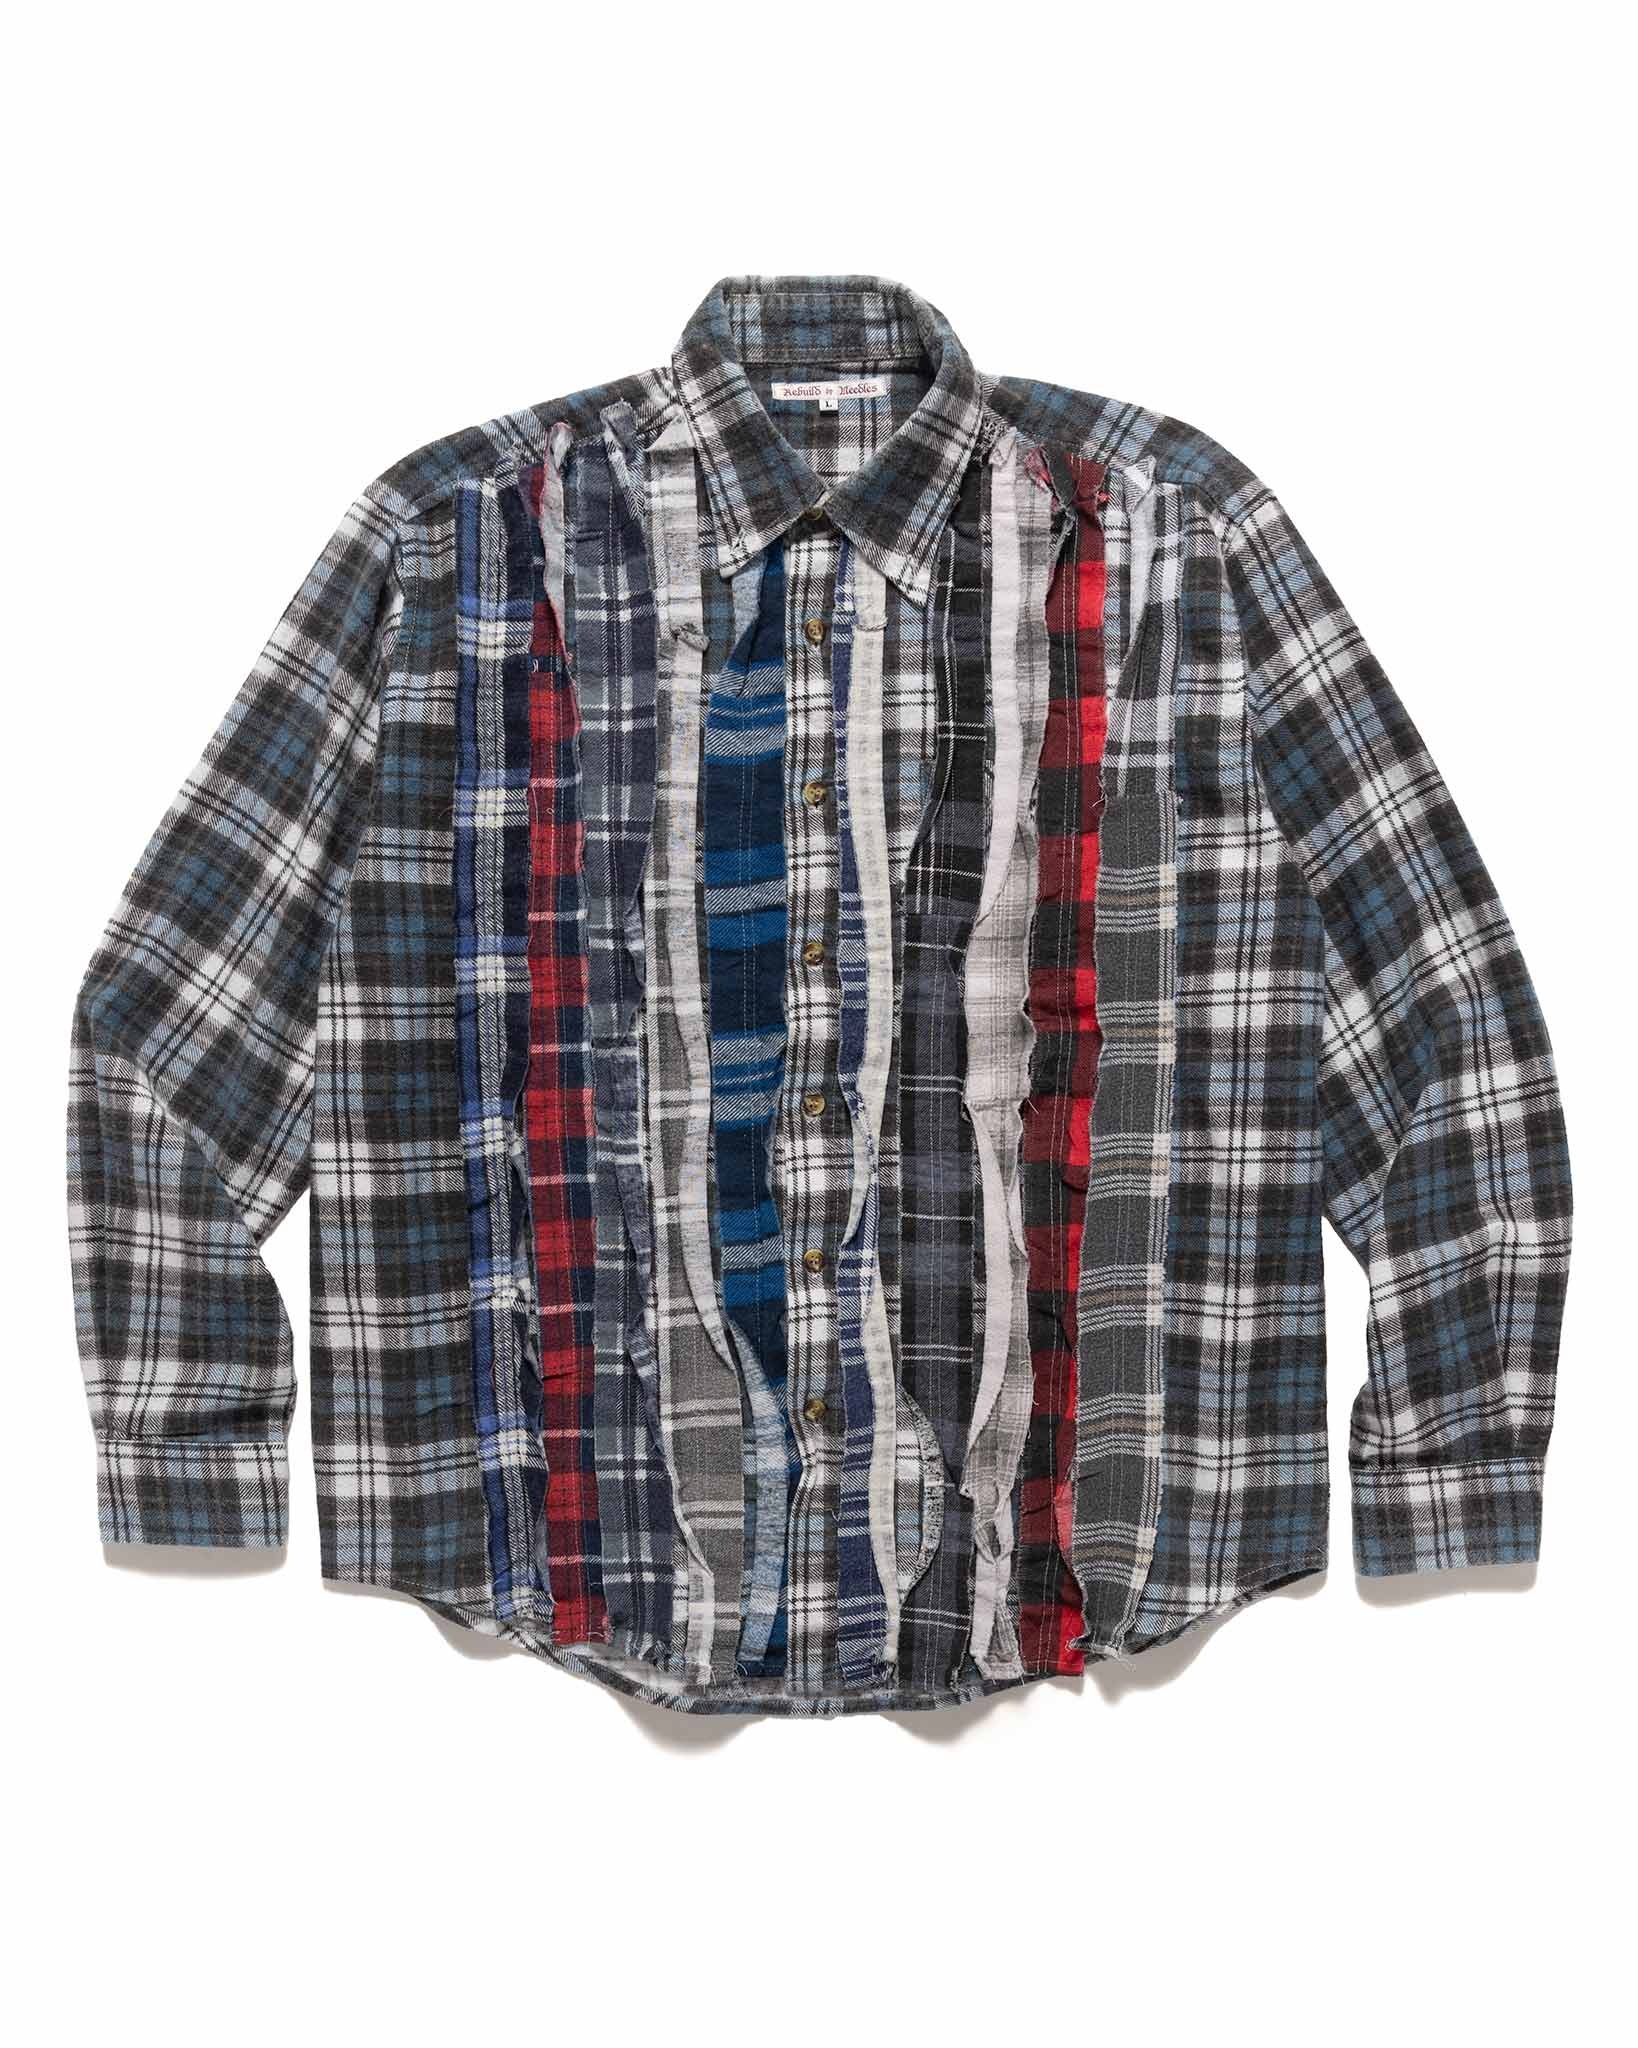 Rebuild by Needles Flannel Shirt -> Ribbon Shirt Assorted - 1